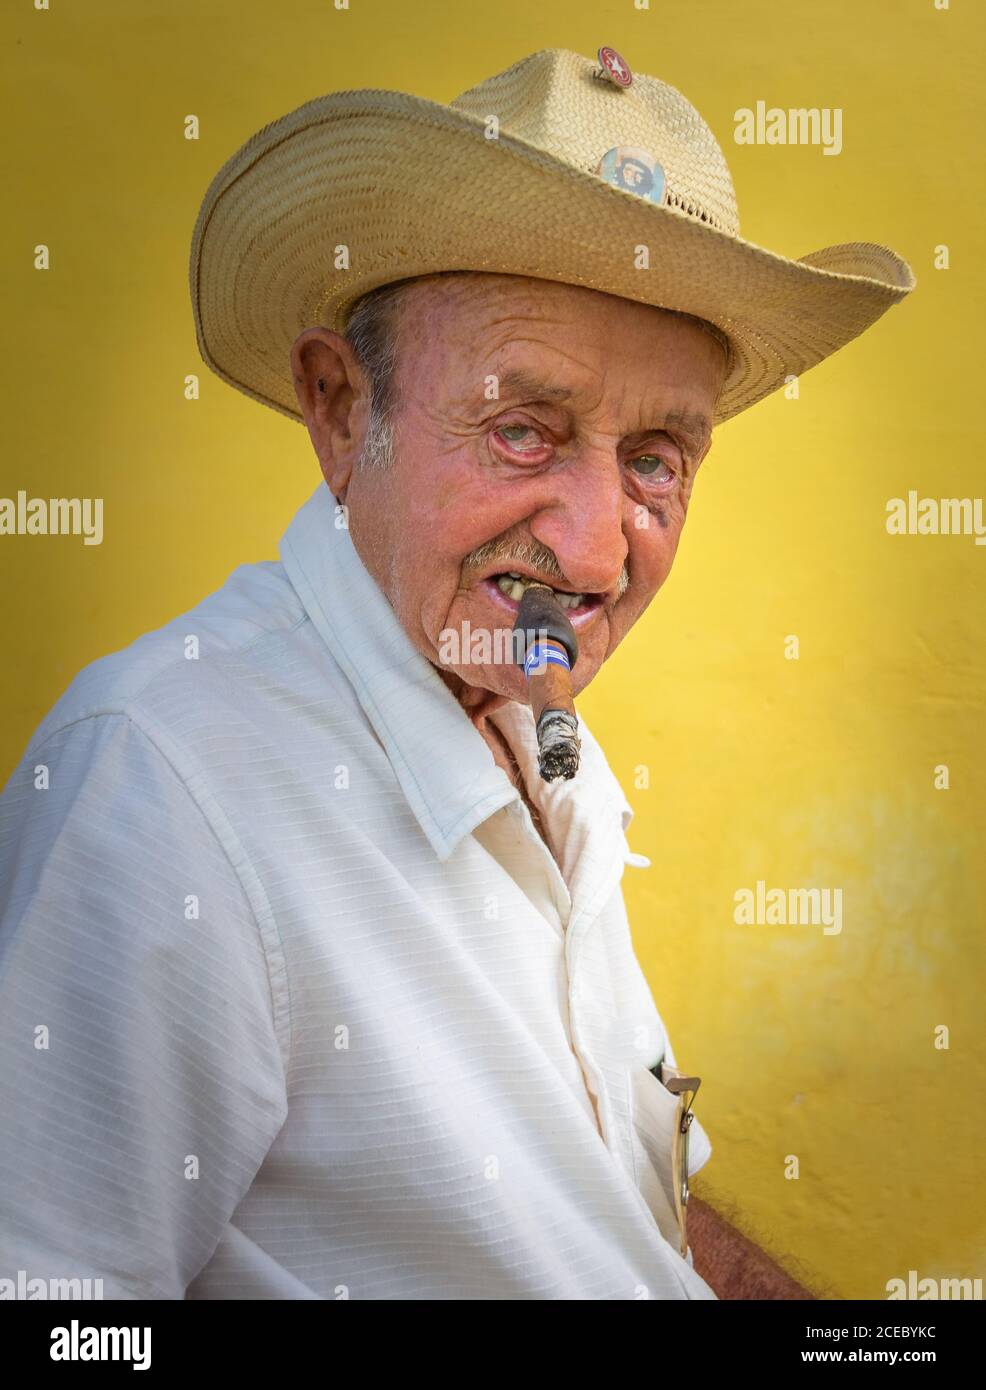 Havana, Cuba - November, 22 2012: Senior male in hat smoking cigar and looking at camera on background of yellow wall on city street Stock Photo